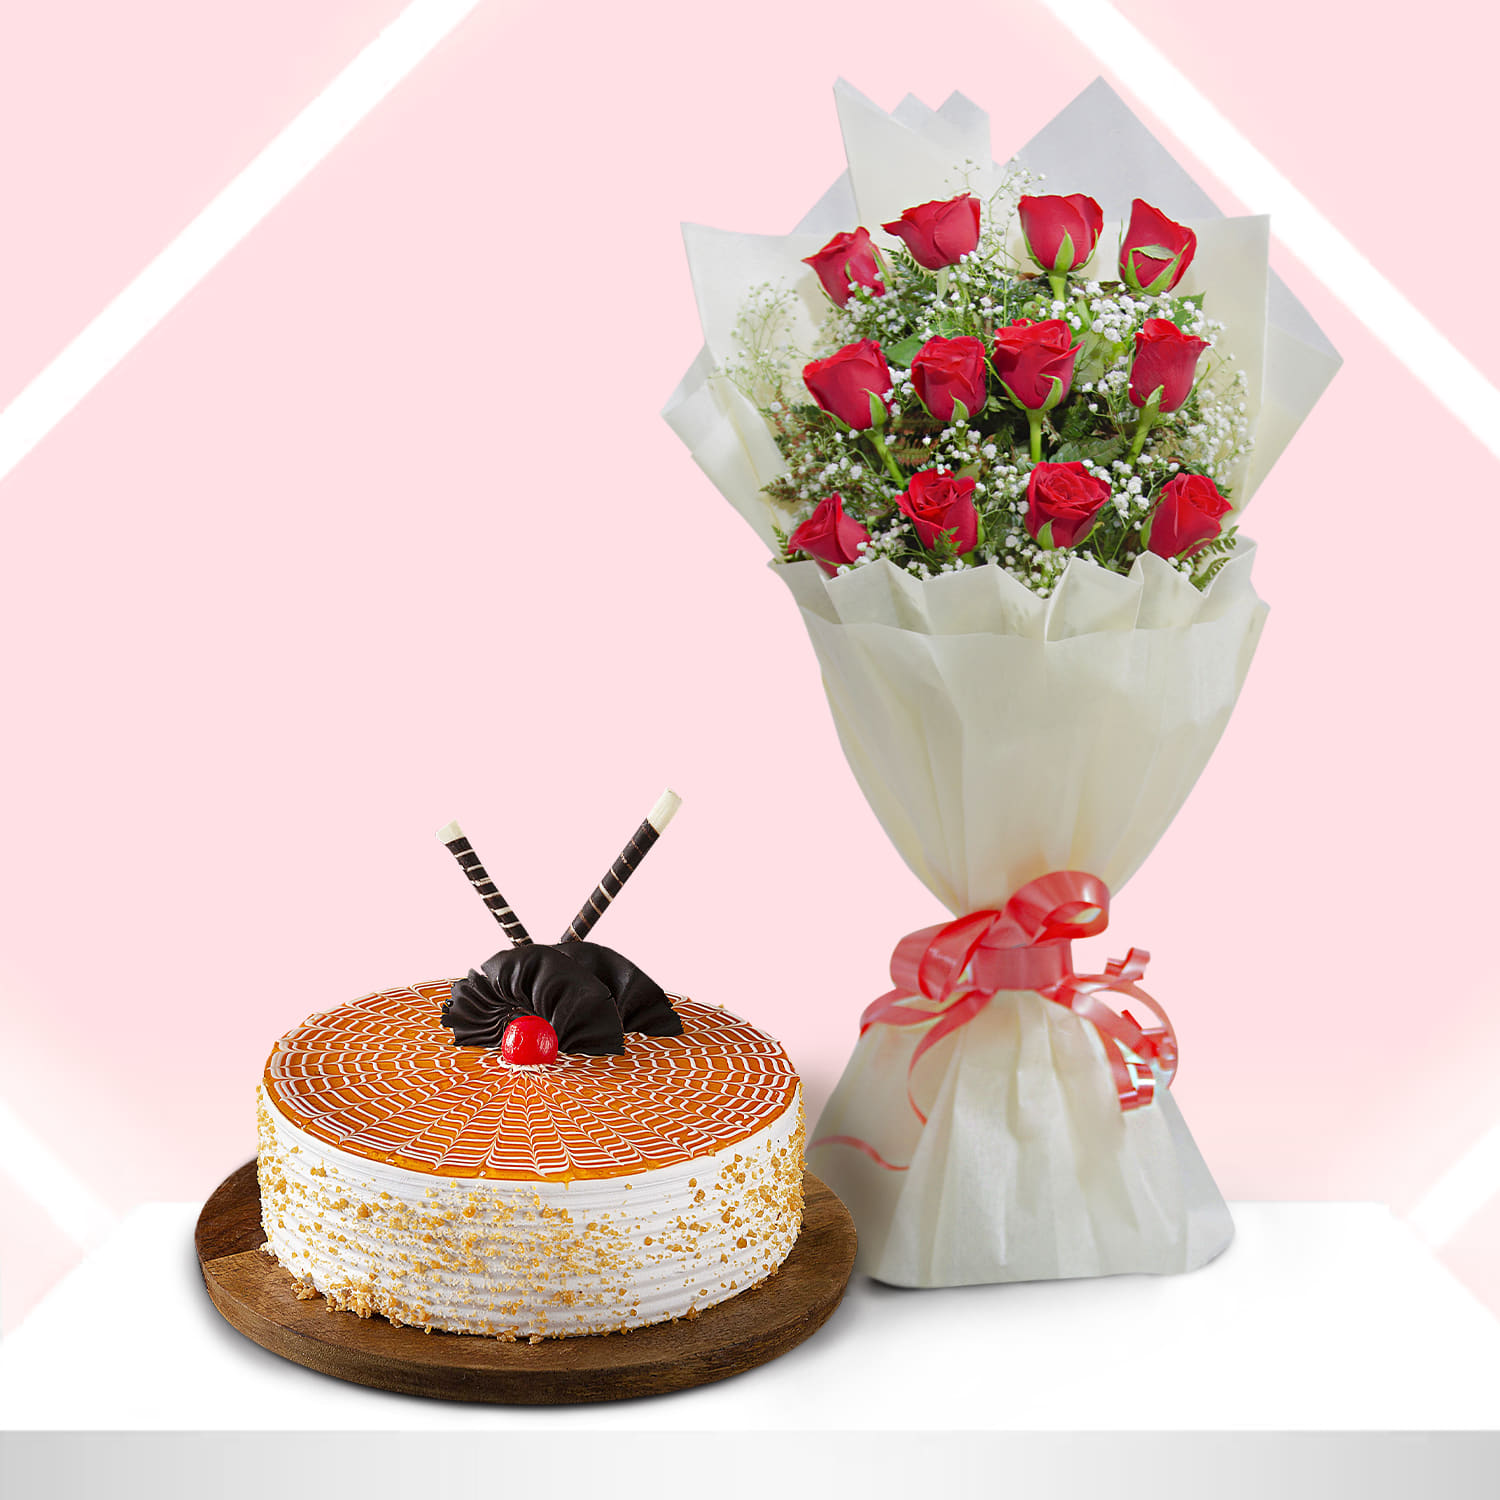 Send Flowers to Belthangady, Cake Gift Delivery in Belthangady, Online Gifts  in Belthangady